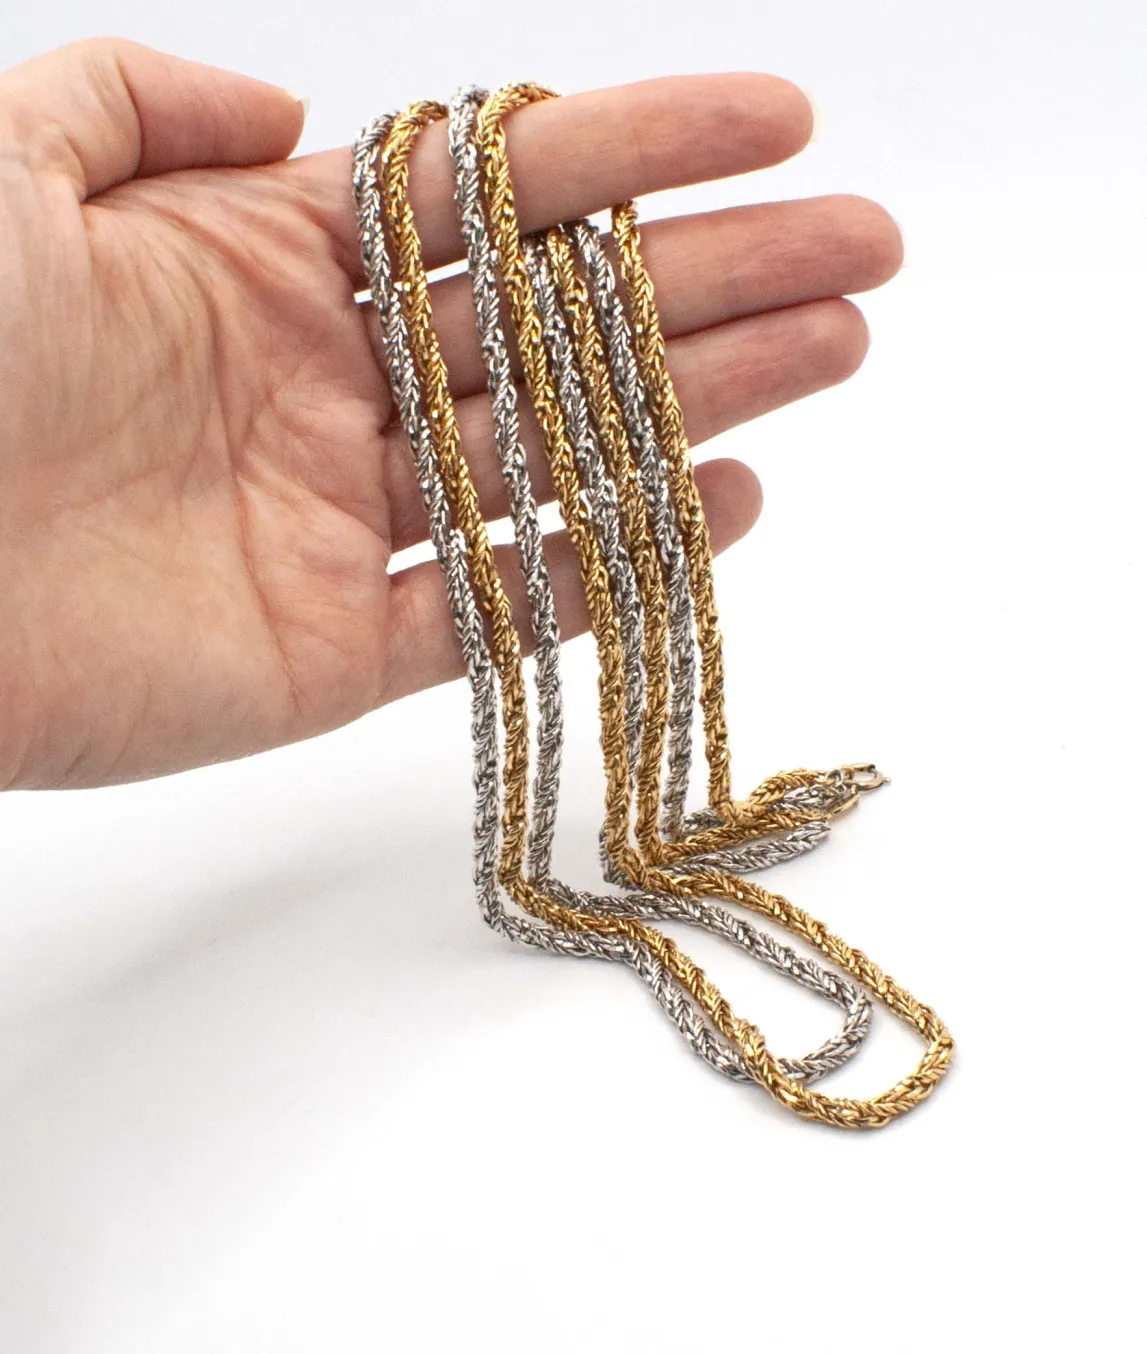 Two strand long rope chain in silver and gold by Grossé held in hand